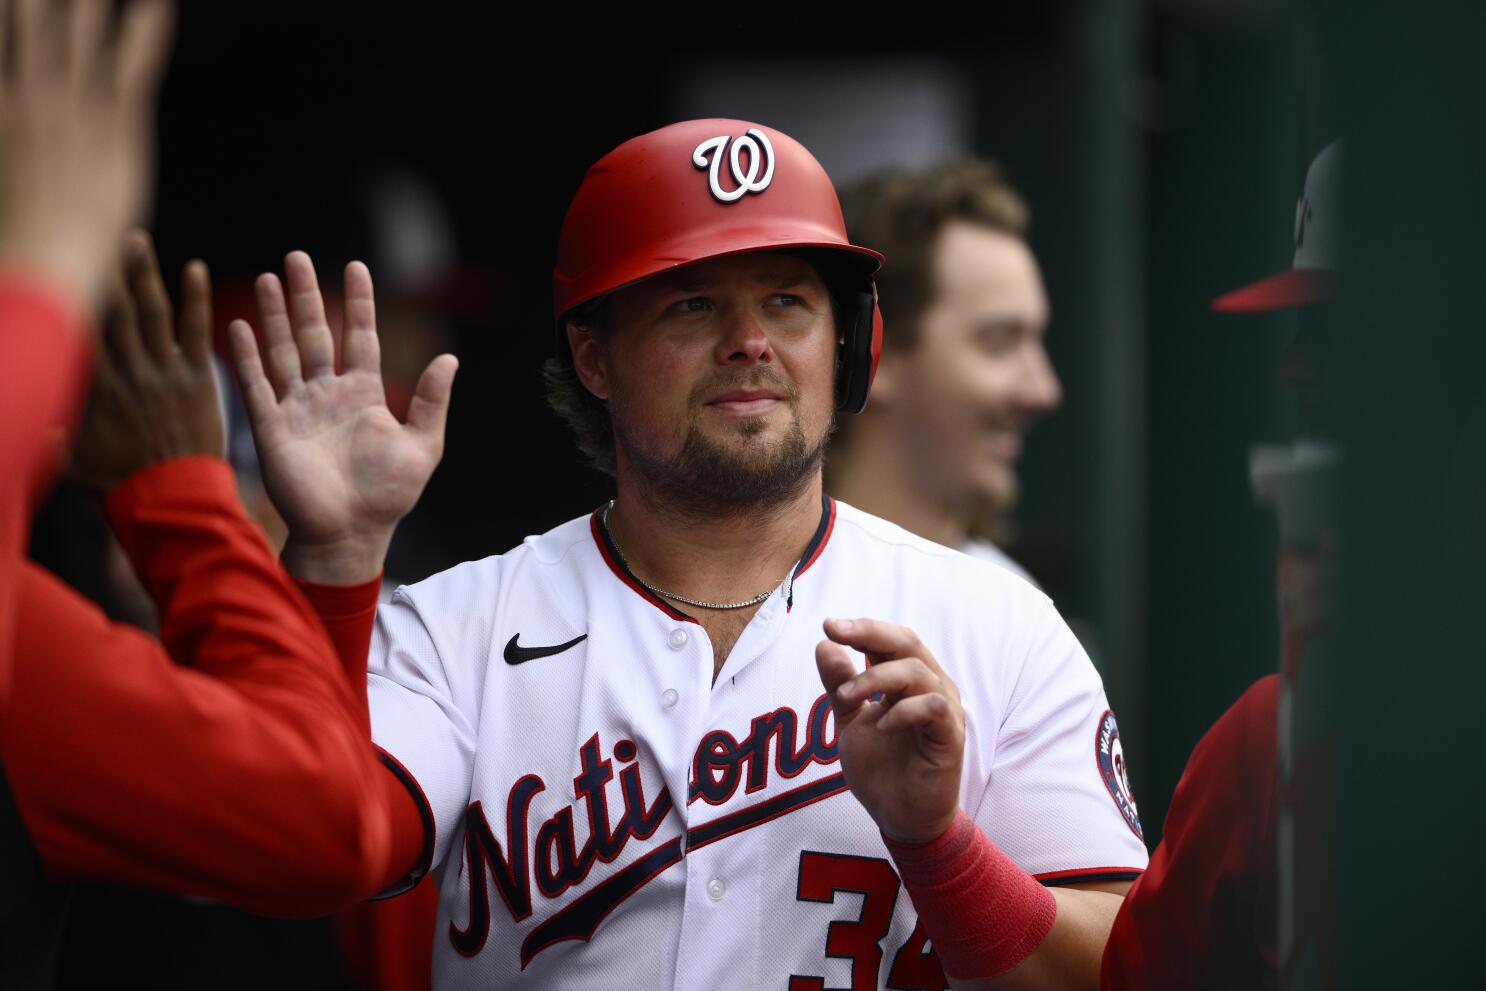 Luke Voit, Tyler Naquin join Brewers with minor league deals - The